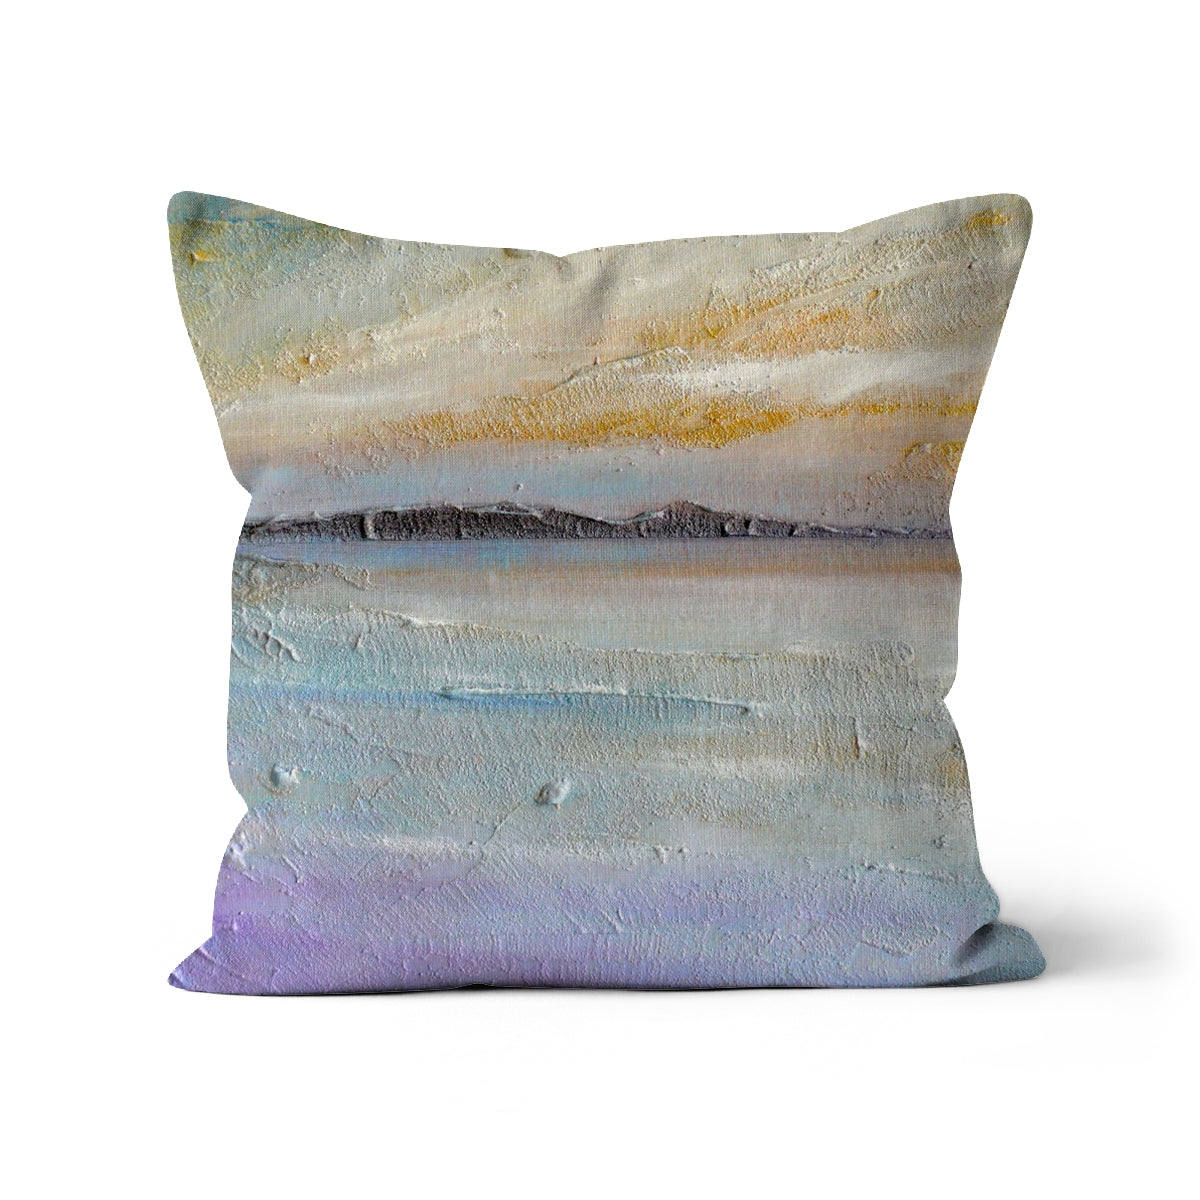 Sollas Beach South Uist Art Gifts Cushion-Cushions-Hebridean Islands Art Gallery-Canvas-18"x18"-Paintings, Prints, Homeware, Art Gifts From Scotland By Scottish Artist Kevin Hunter